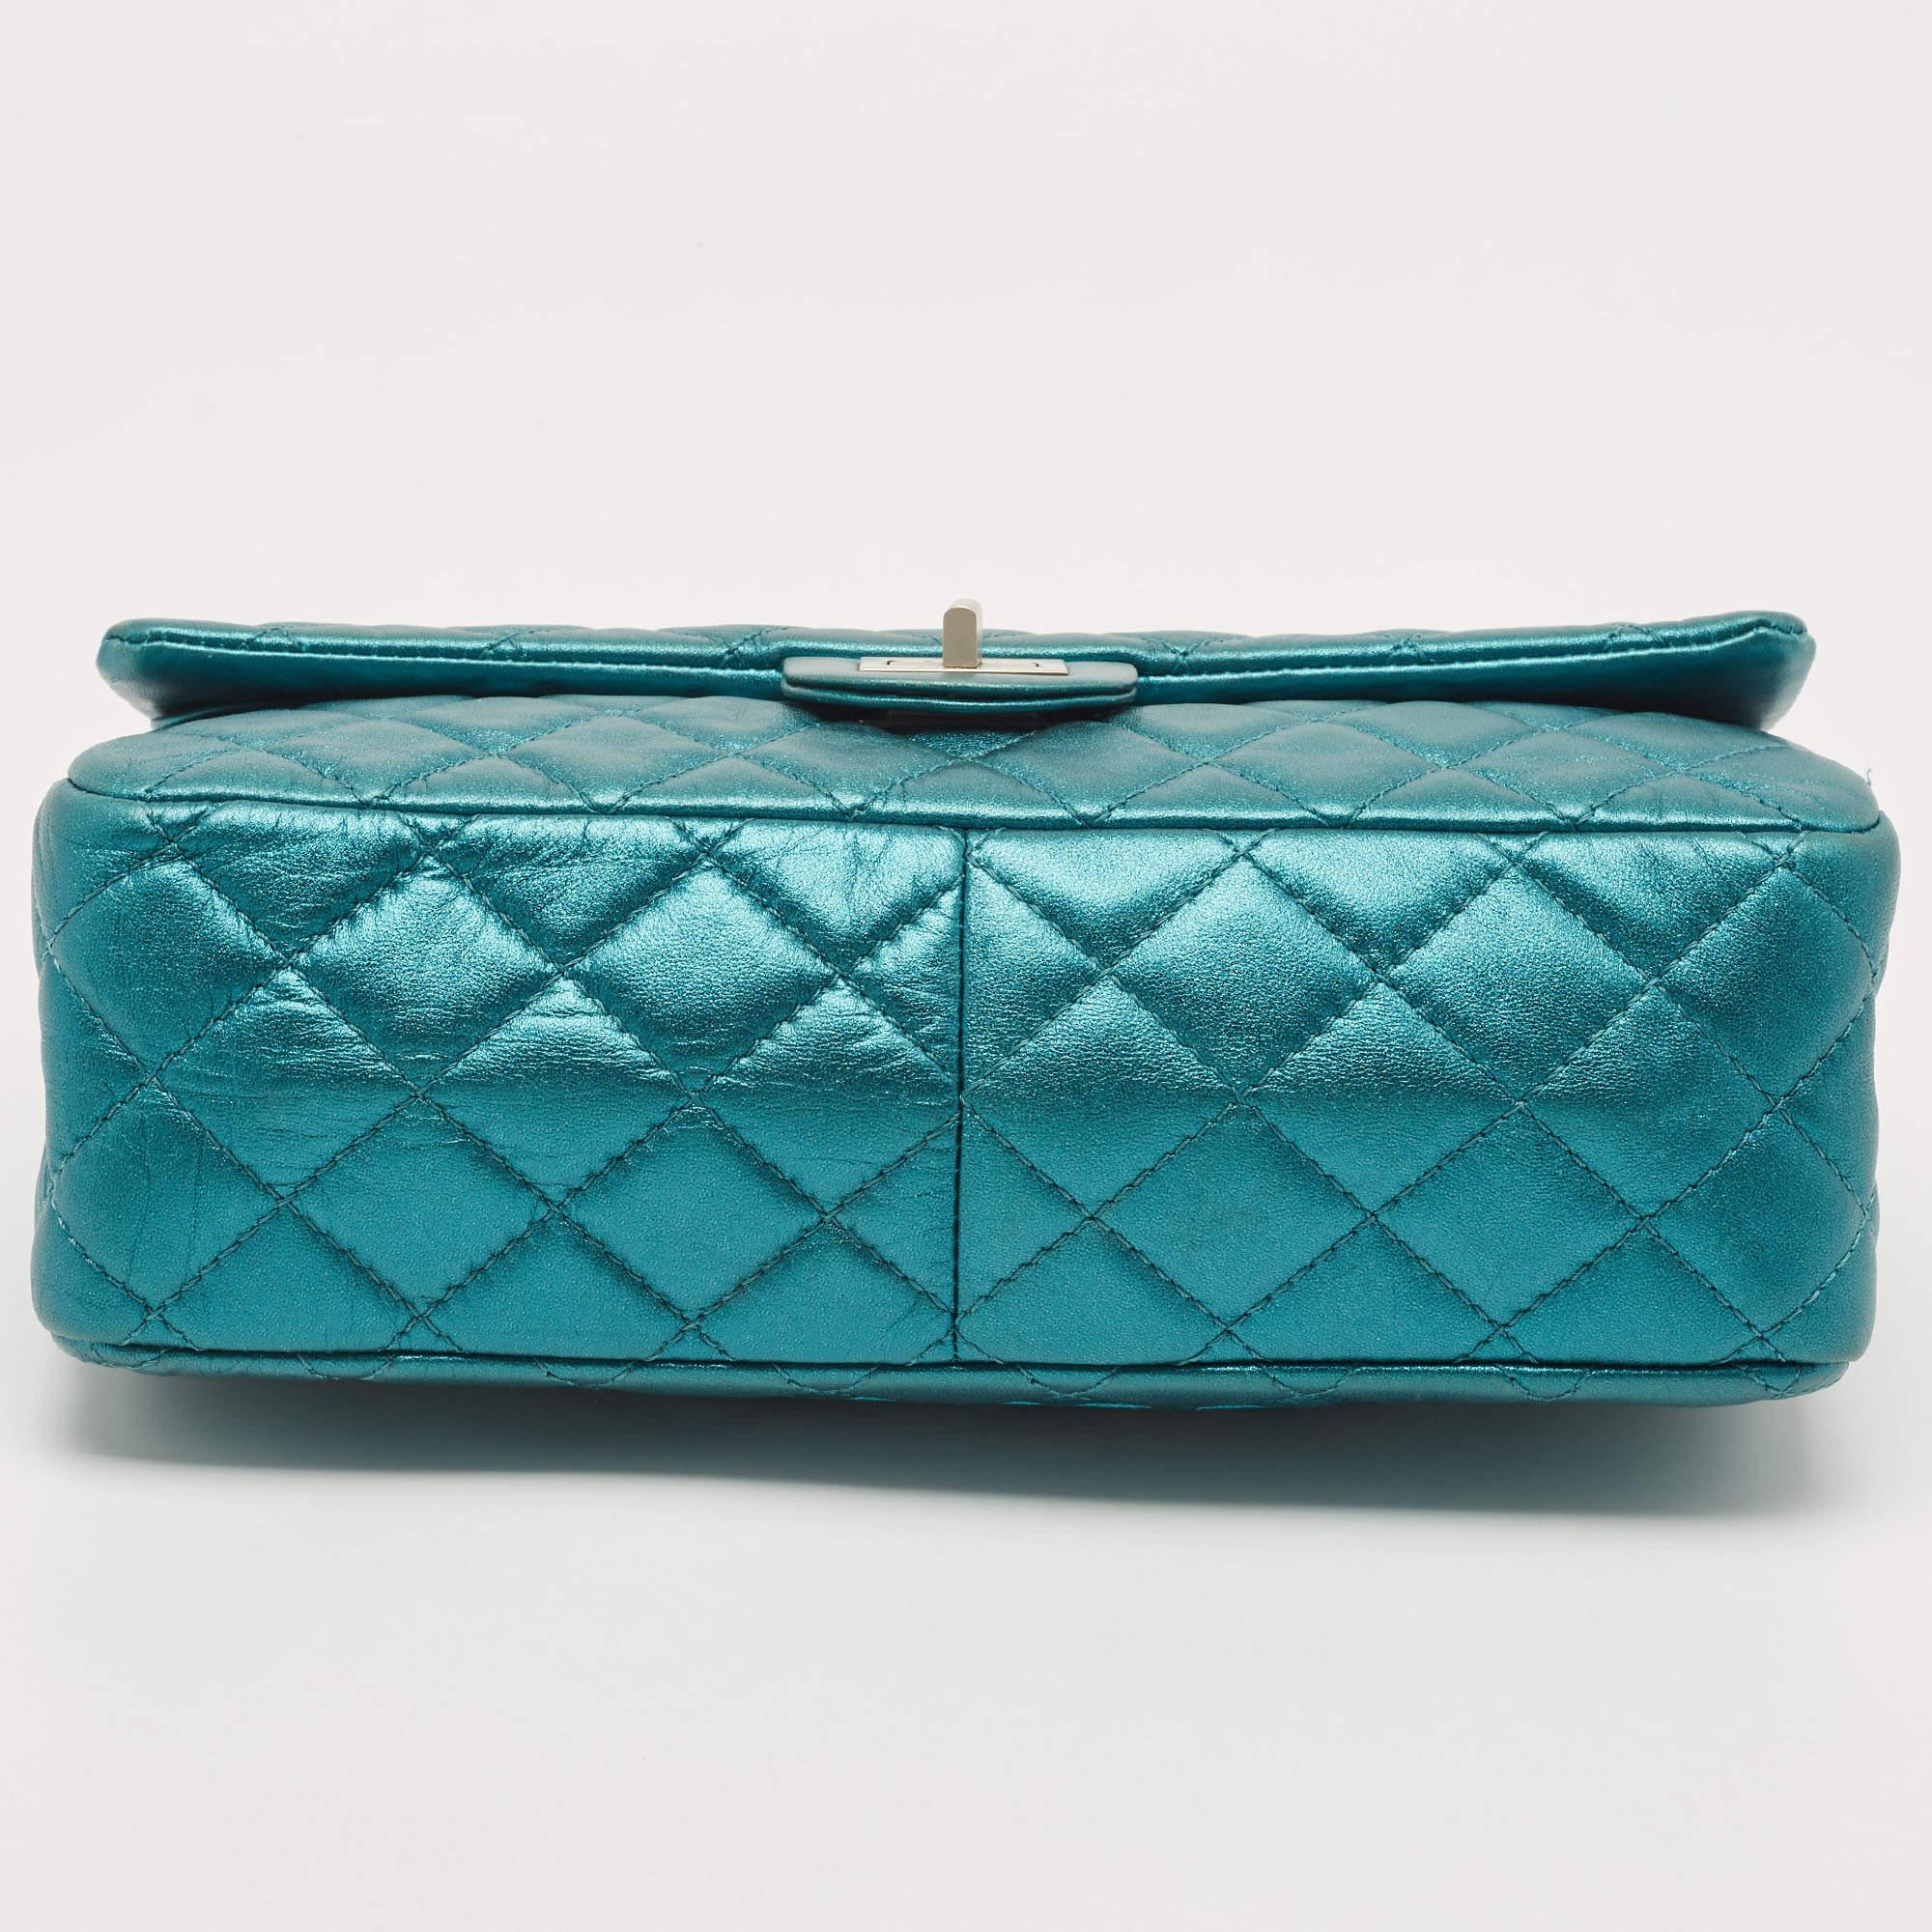 Chanel Metallic Teal Green Quilted Leather Reissue 2.55 Classic 226 Flap Bag Pour femmes en vente